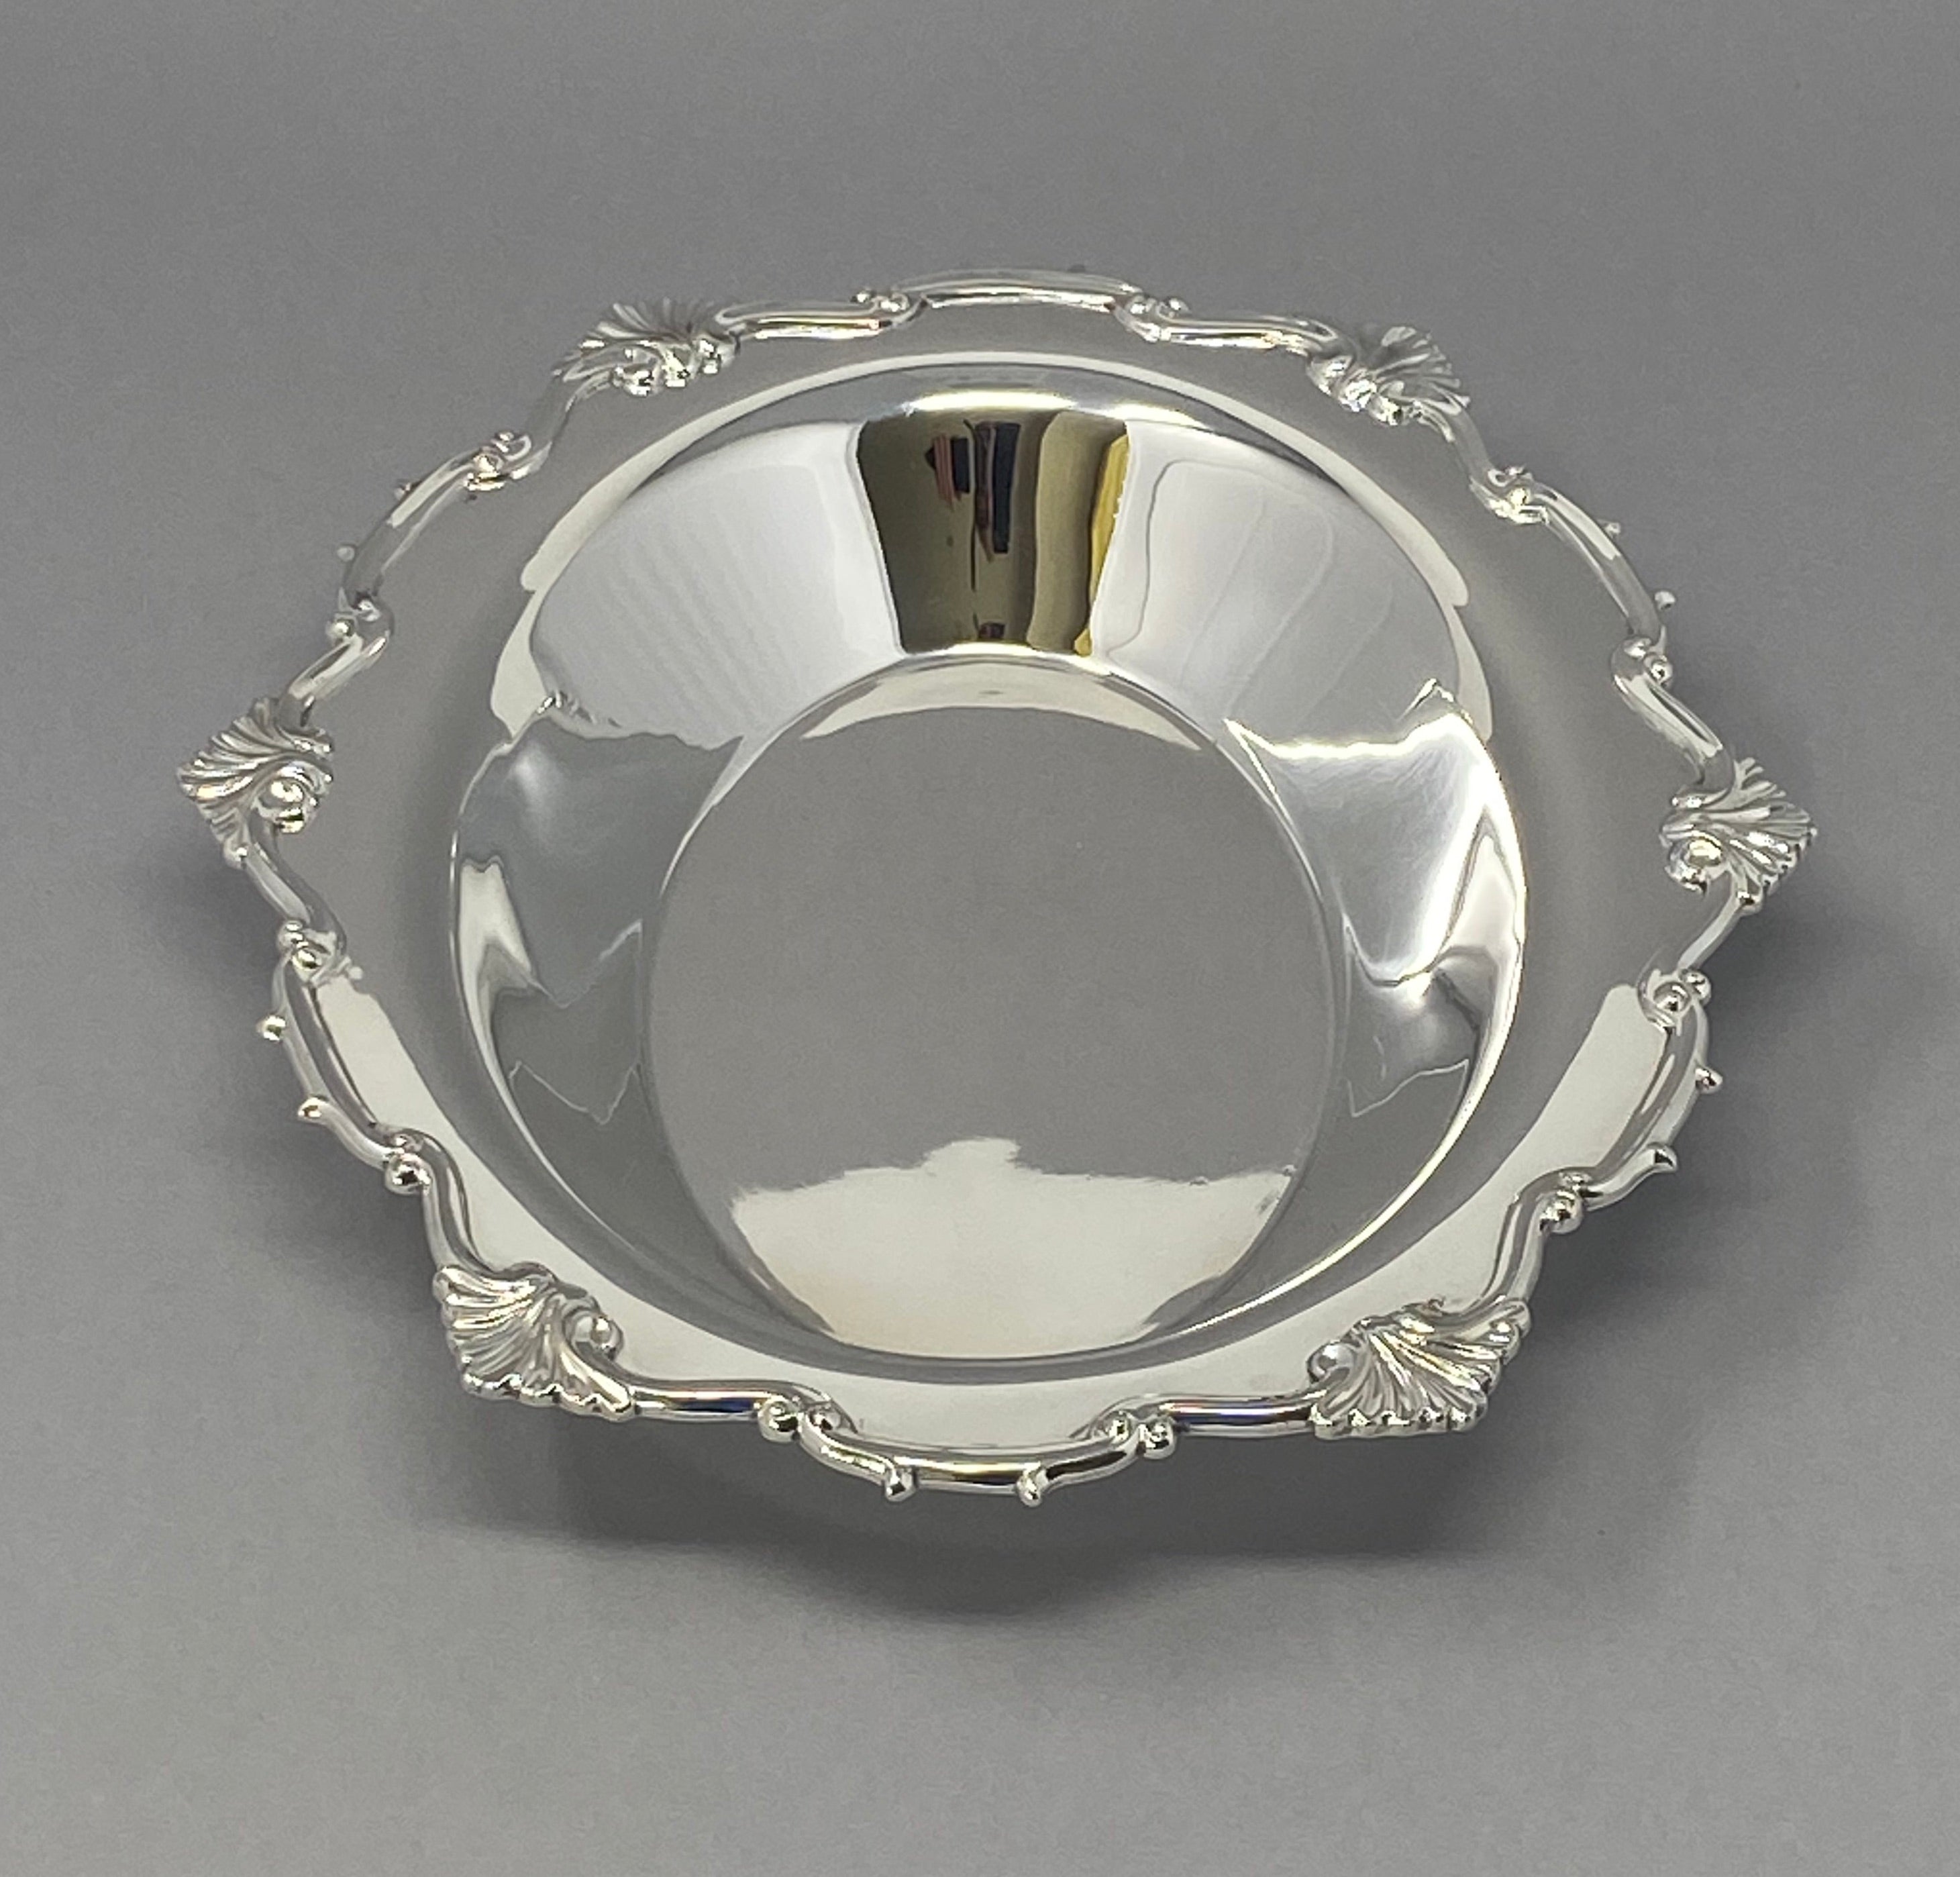 Antique Silver Plated Bread Dish